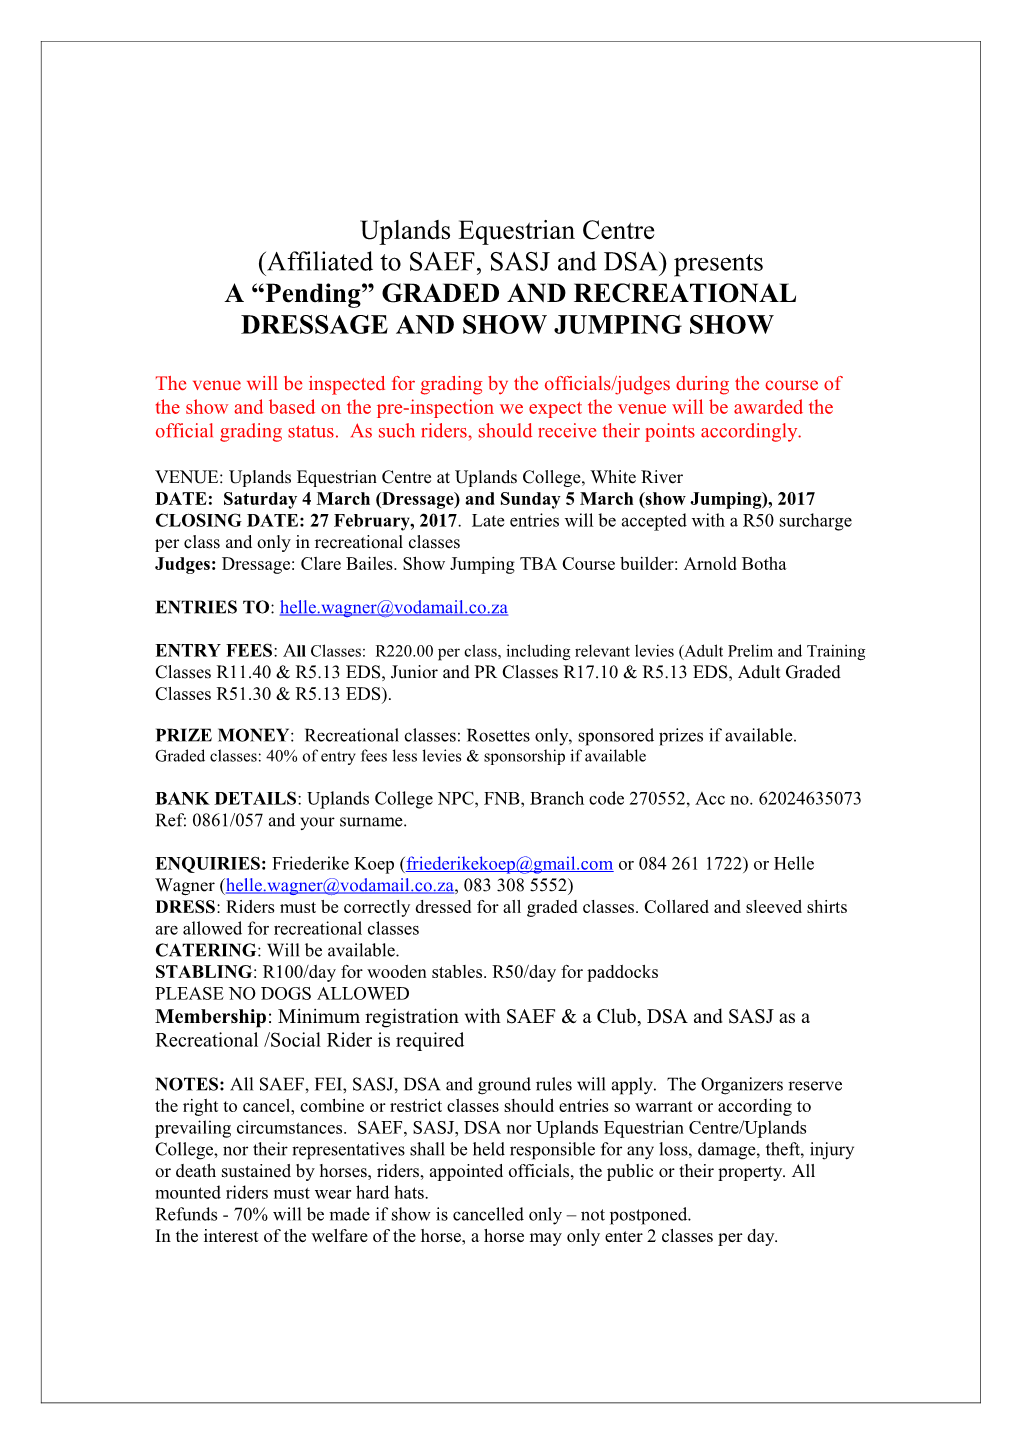 A Pending GRADED and RECREATIONAL DRESSAGE and SHOW JUMPING SHOW